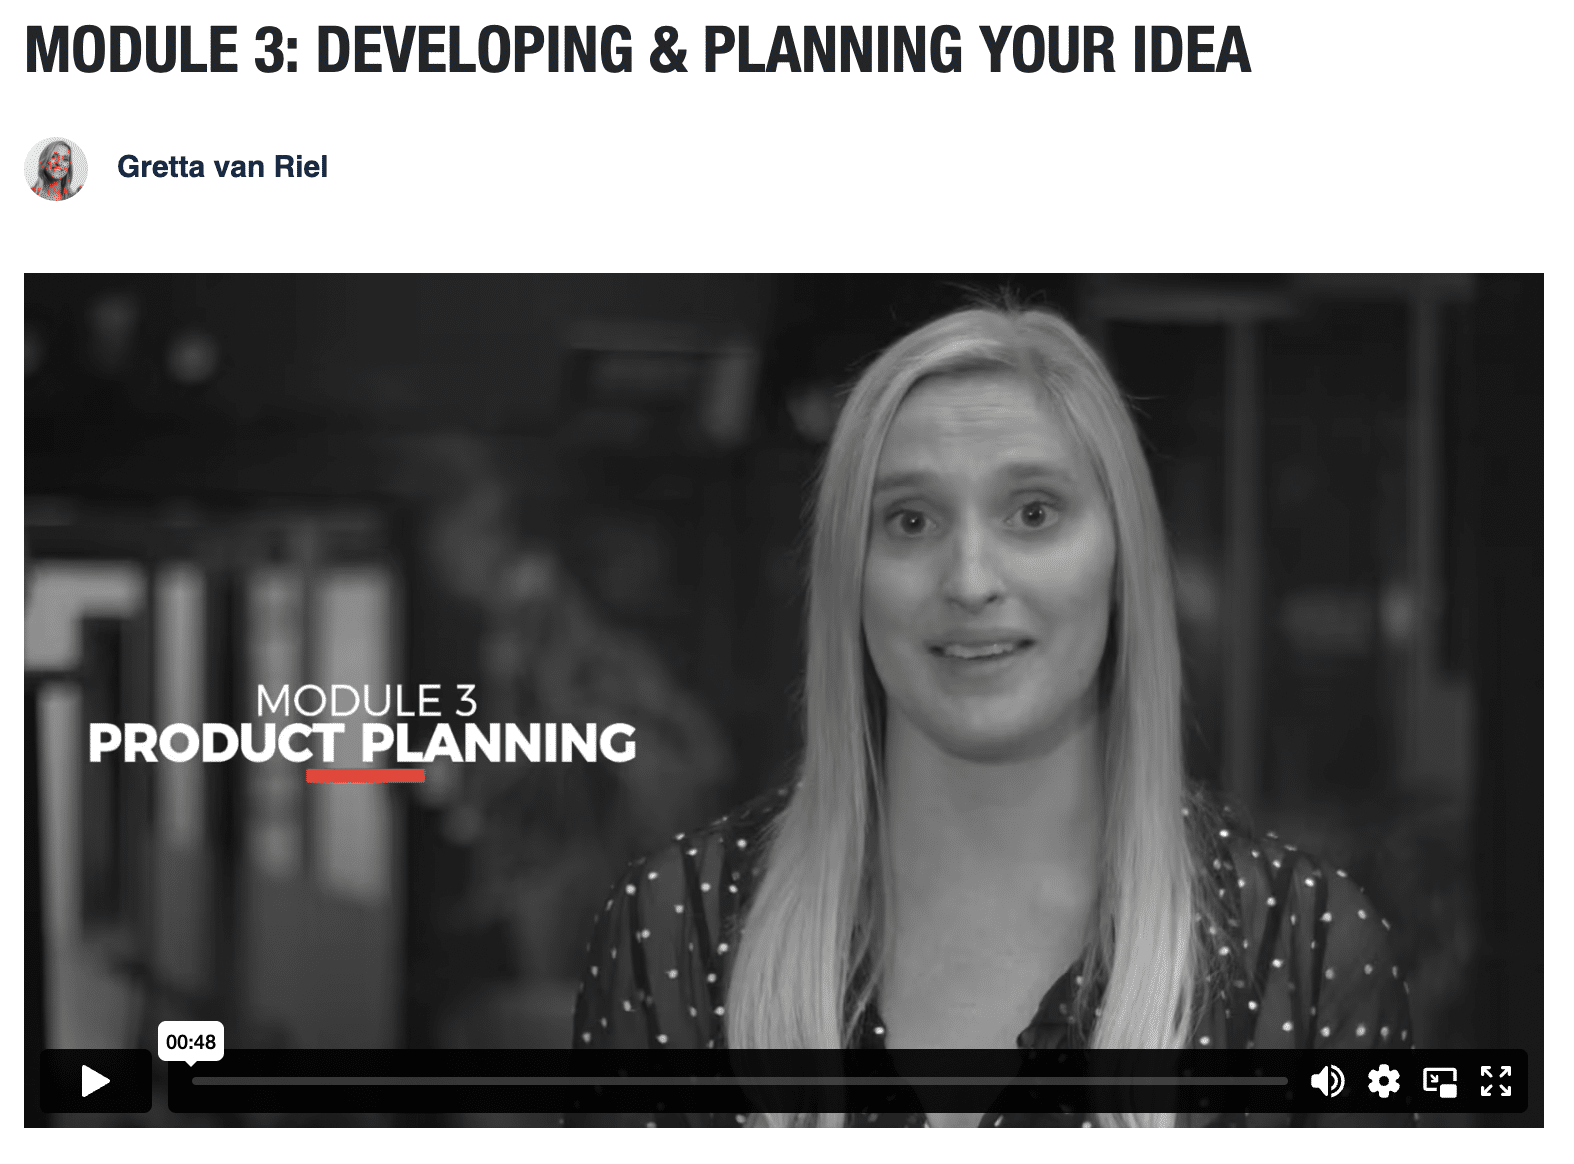 Module 3: Developing & Planning Your Idea